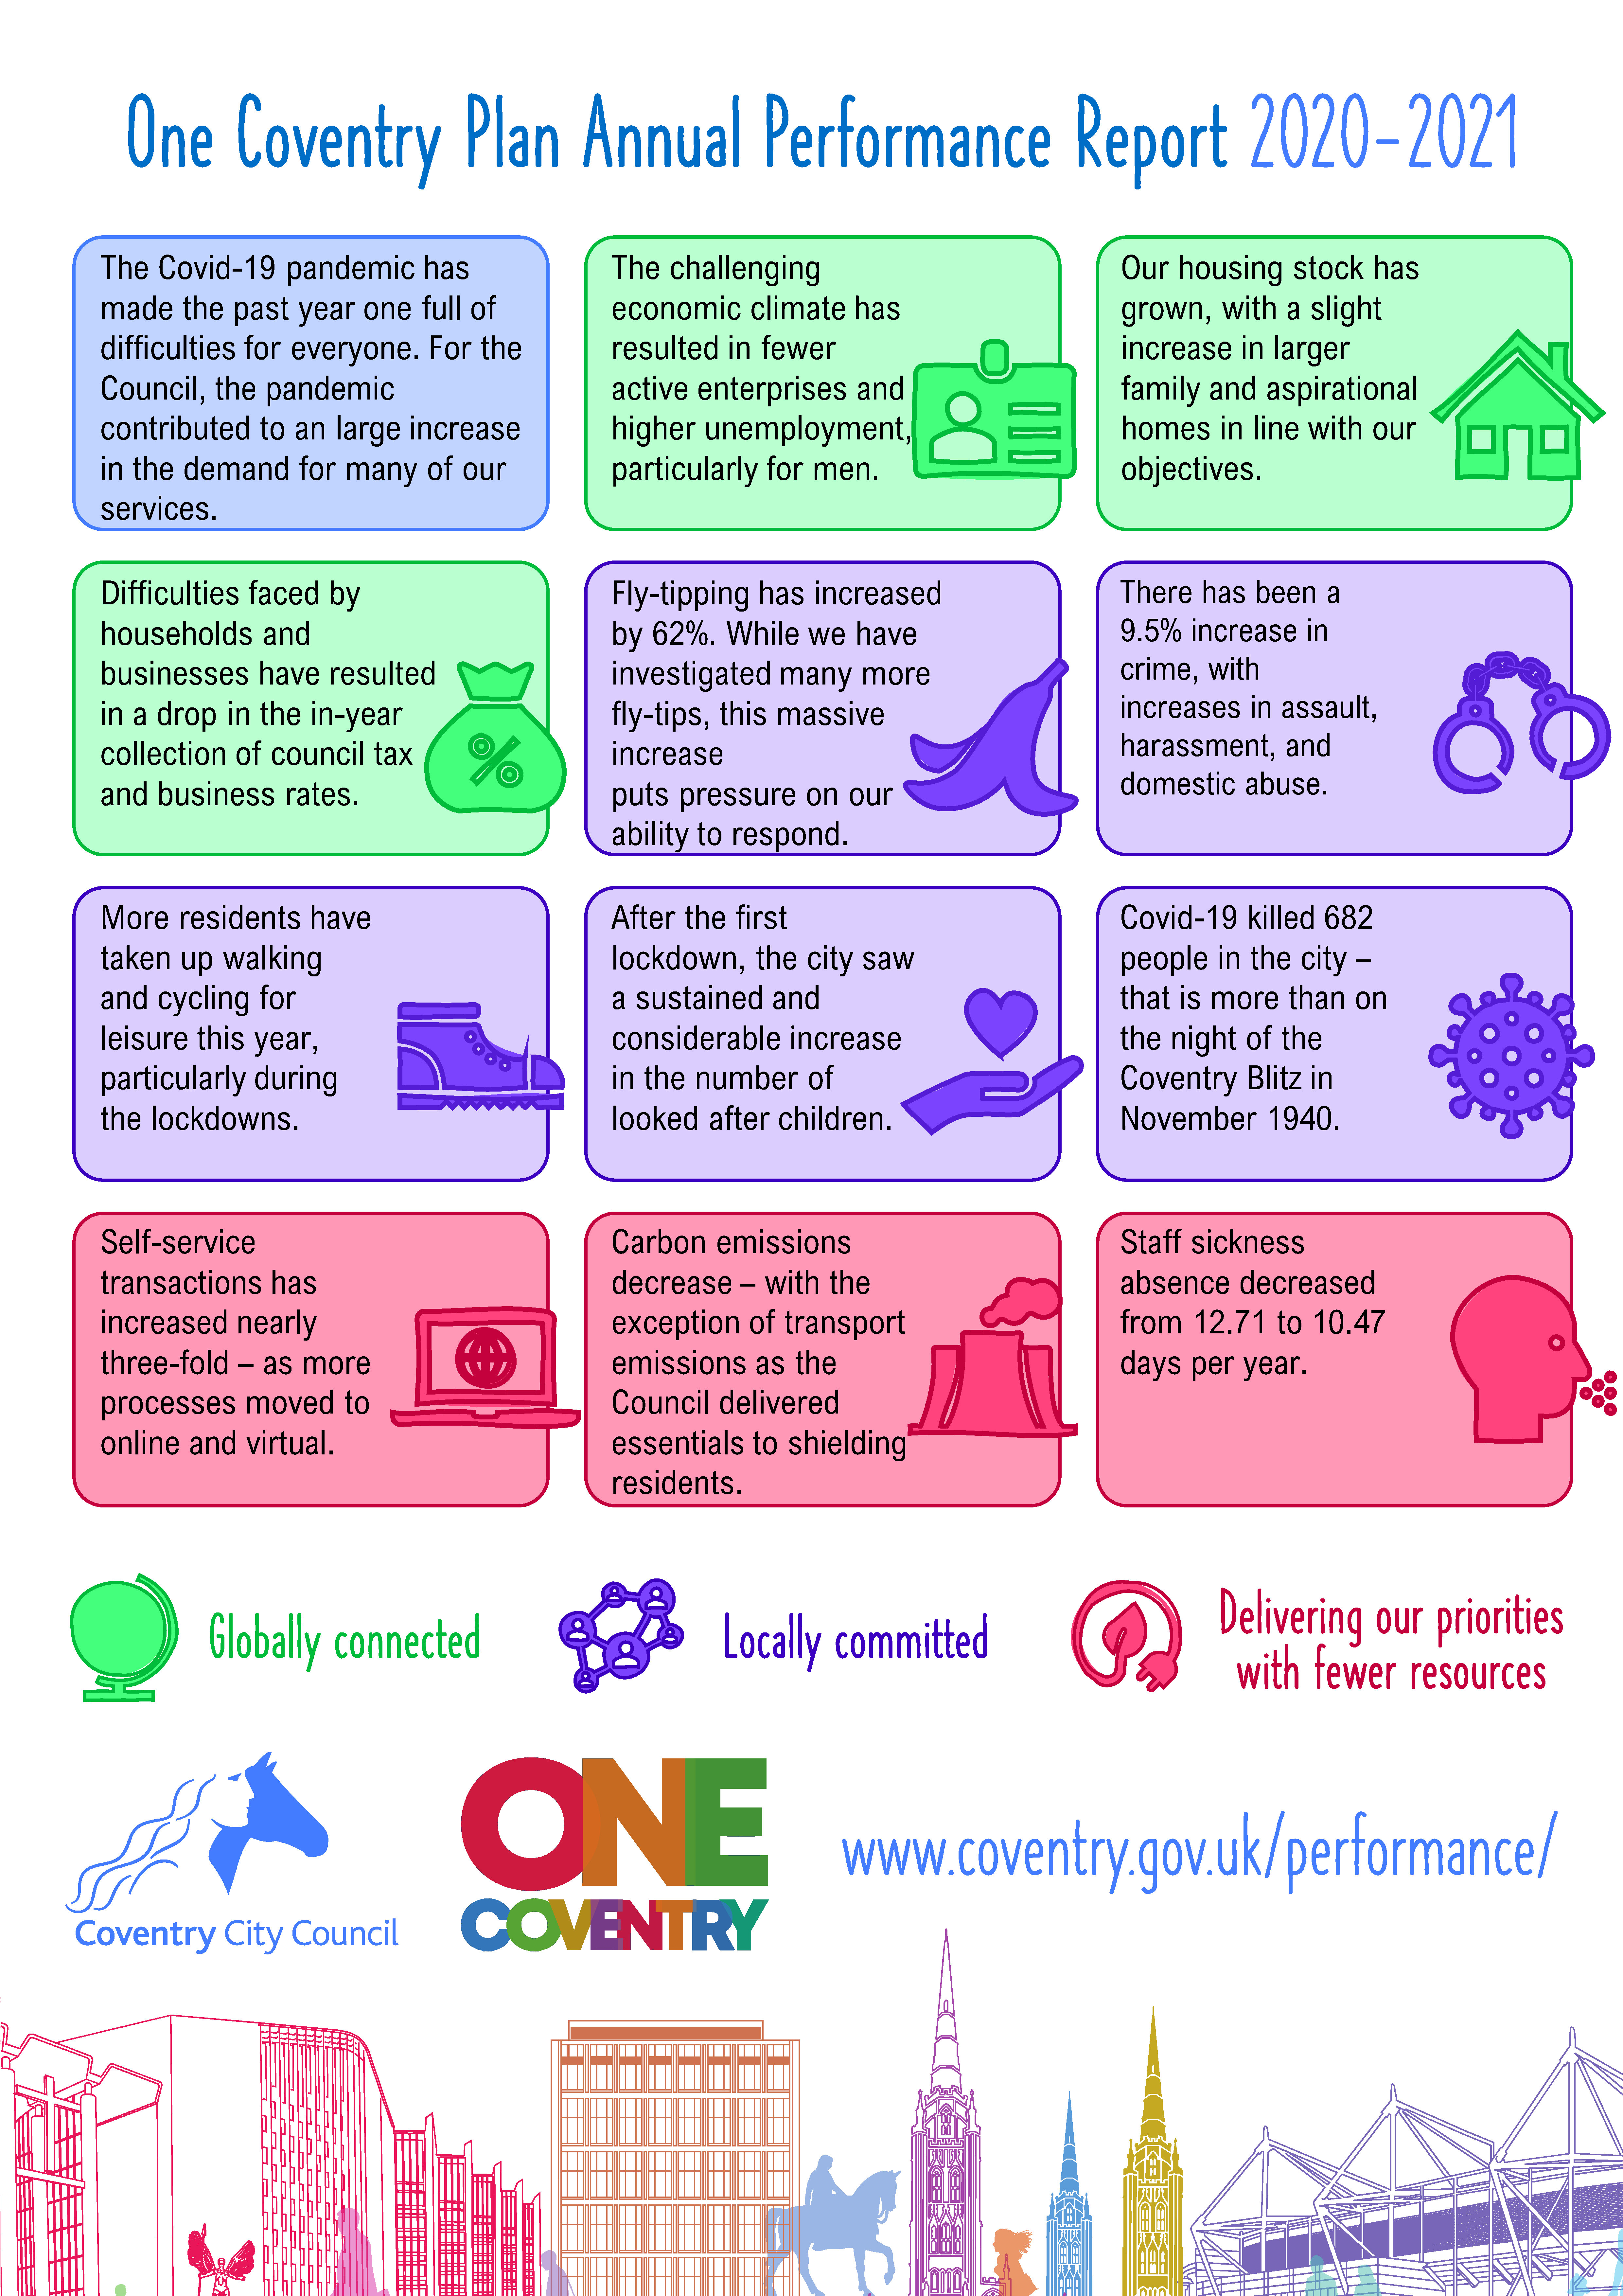 2020-21 One Coventry Plan Annual Performance Report INFOGRAPHIC